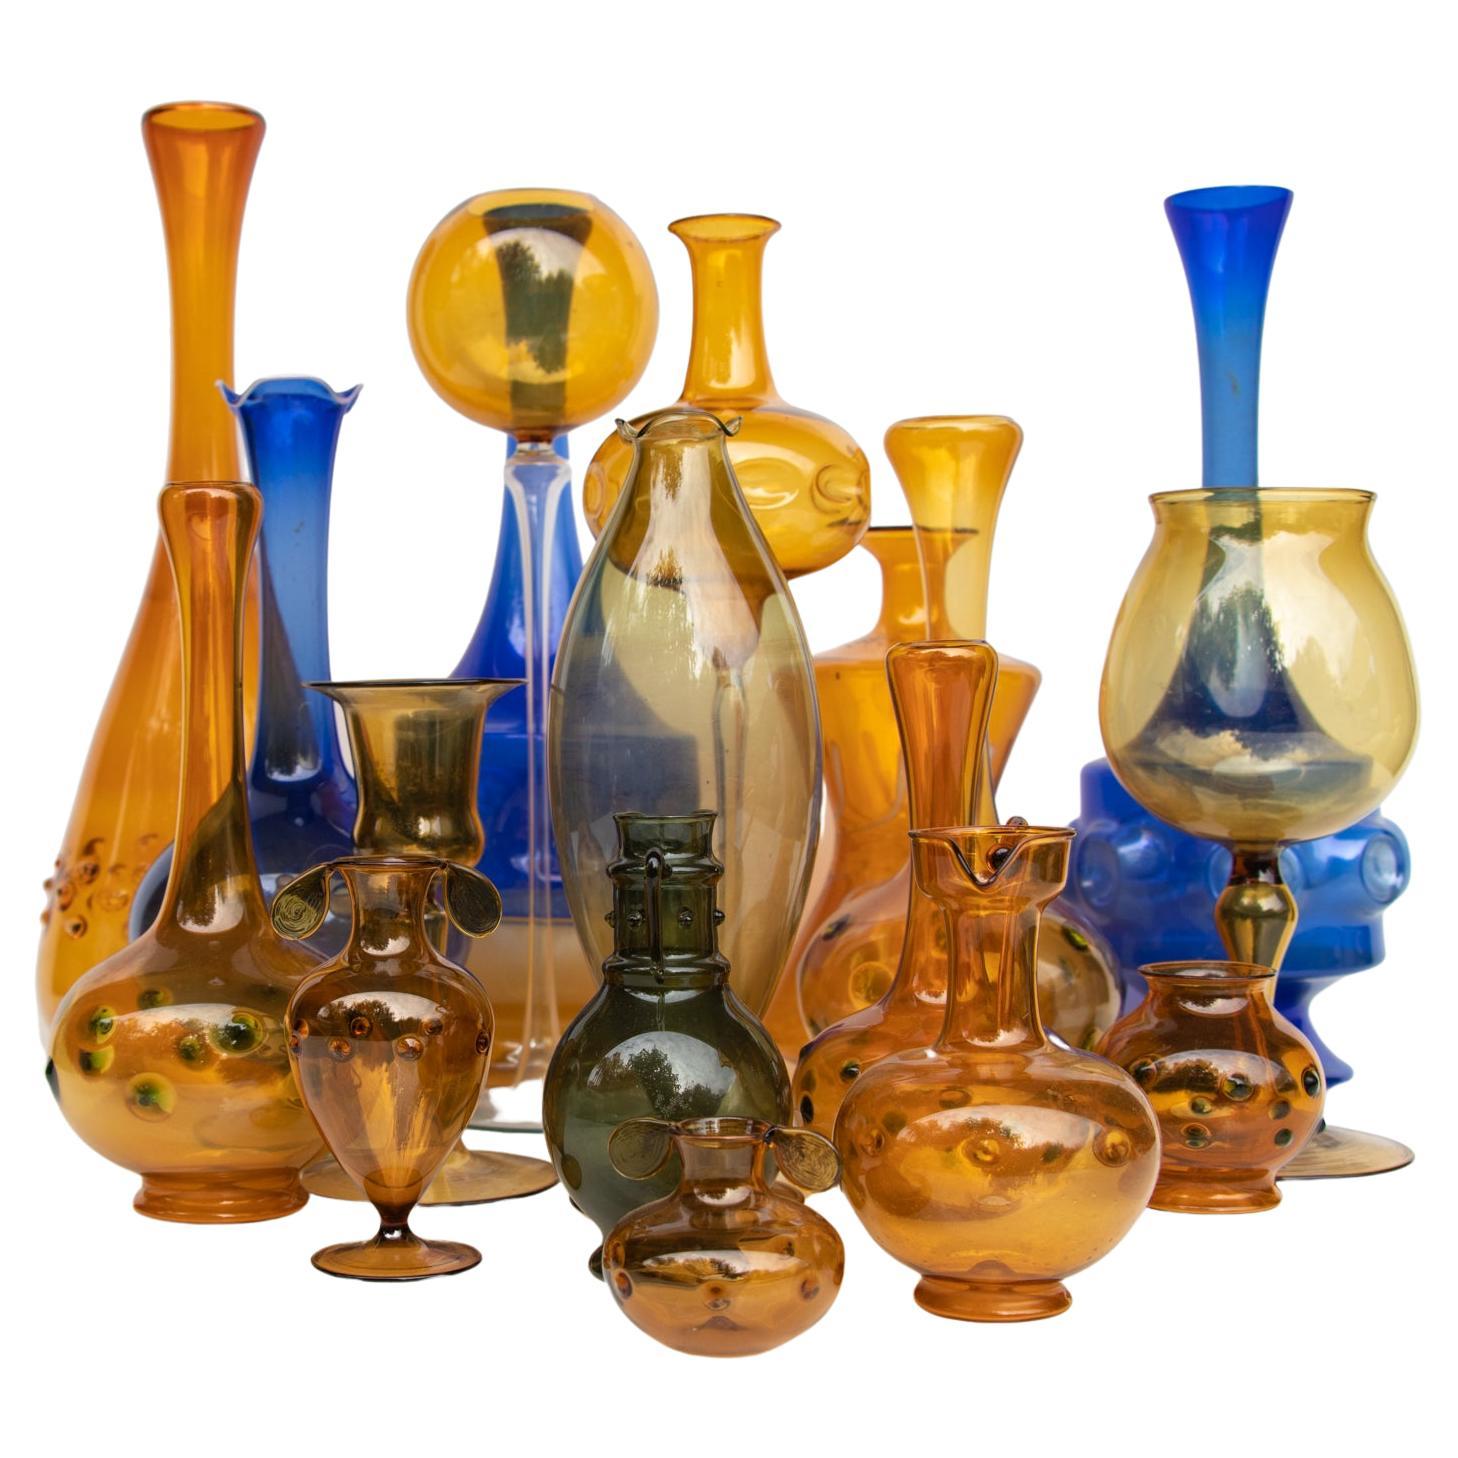 Collection of 18 Decorative Glass Vases by Bimini / Lauscha